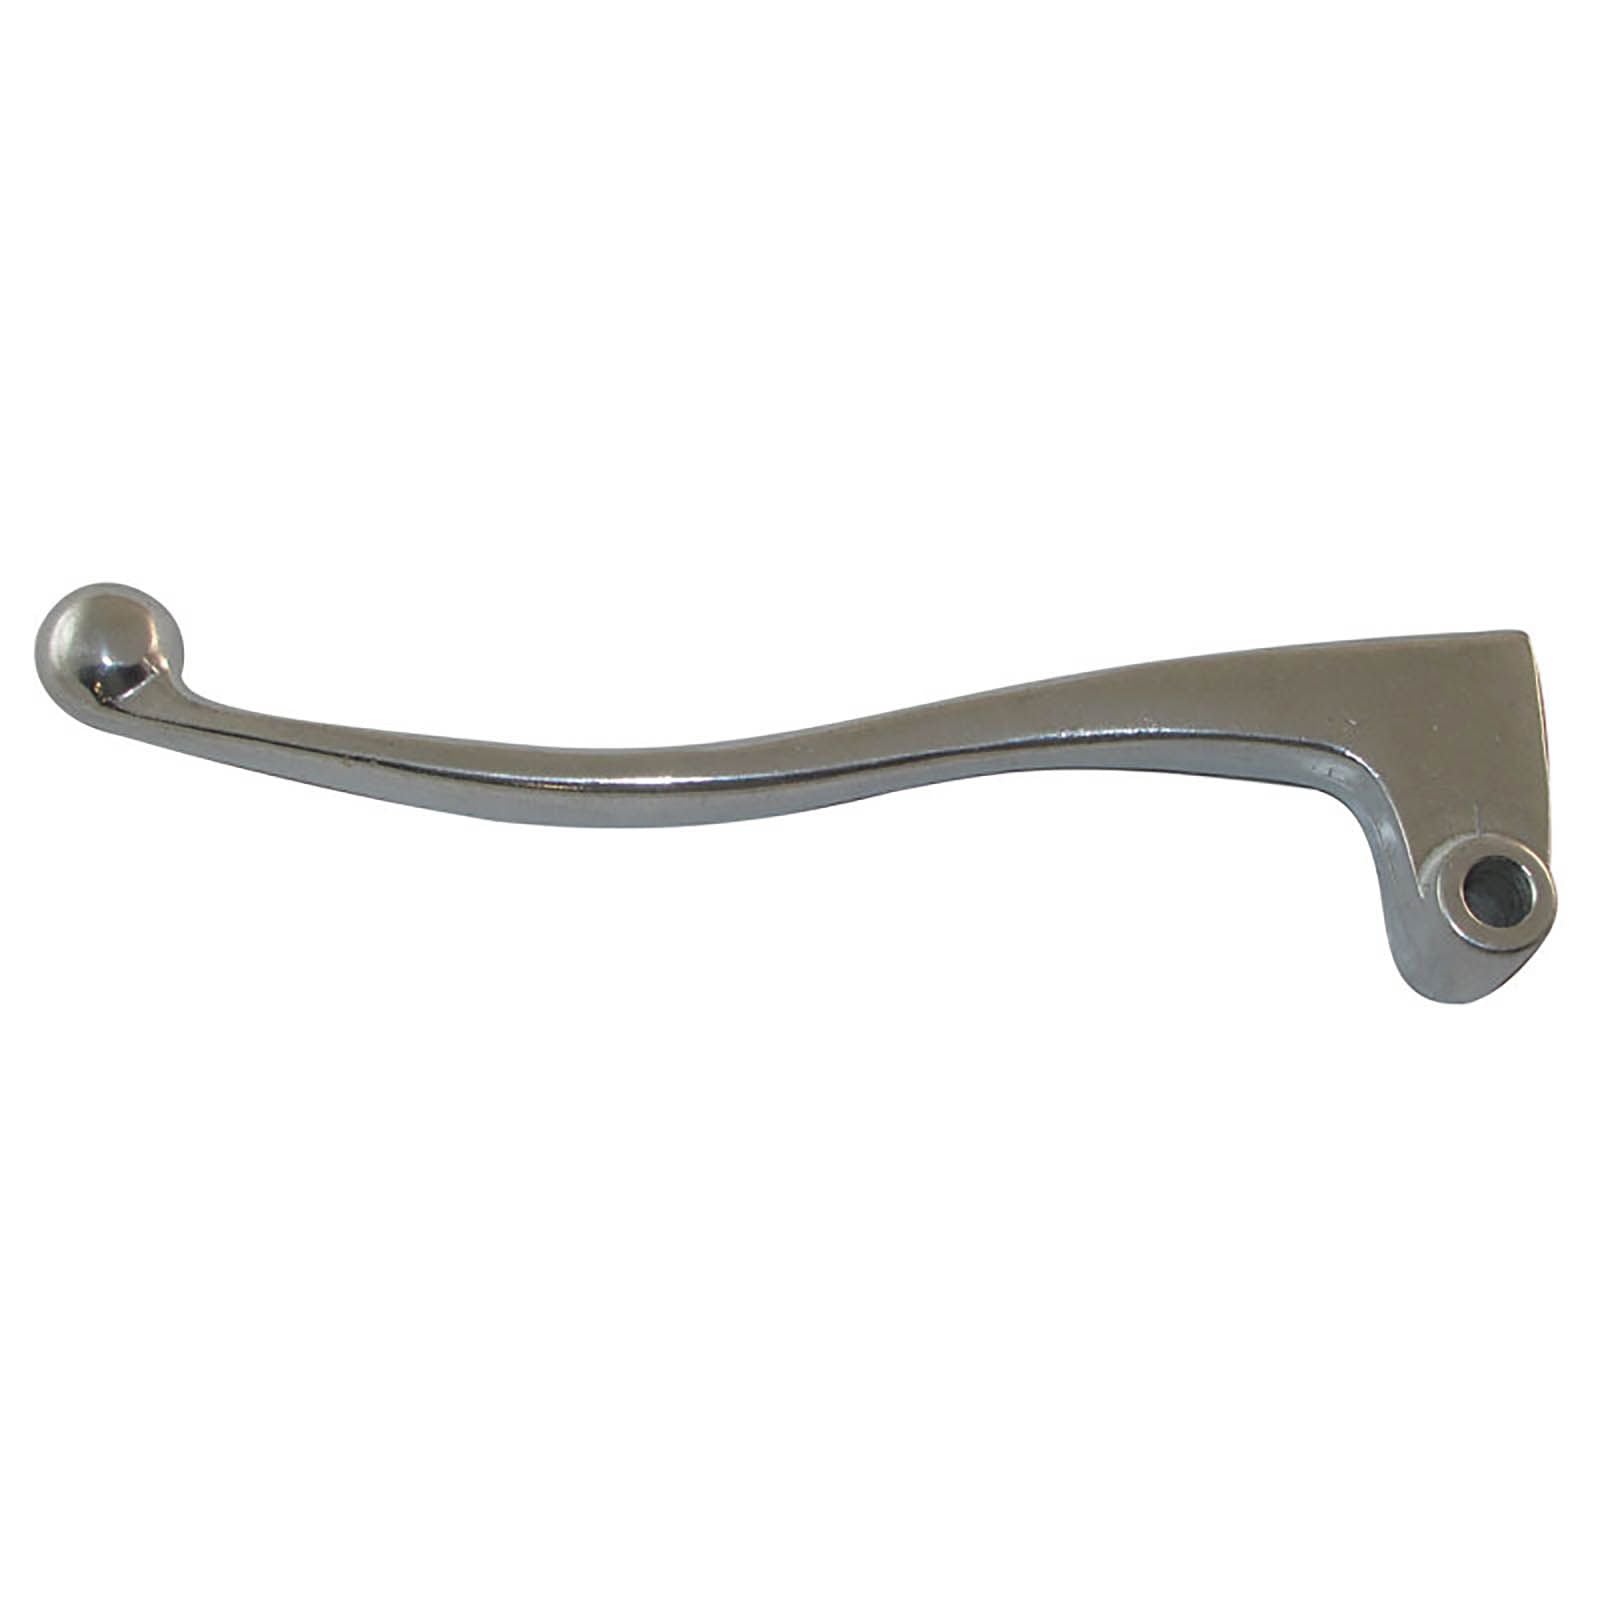 New WHITES Motorcycle Clutch Lever #LCTR422